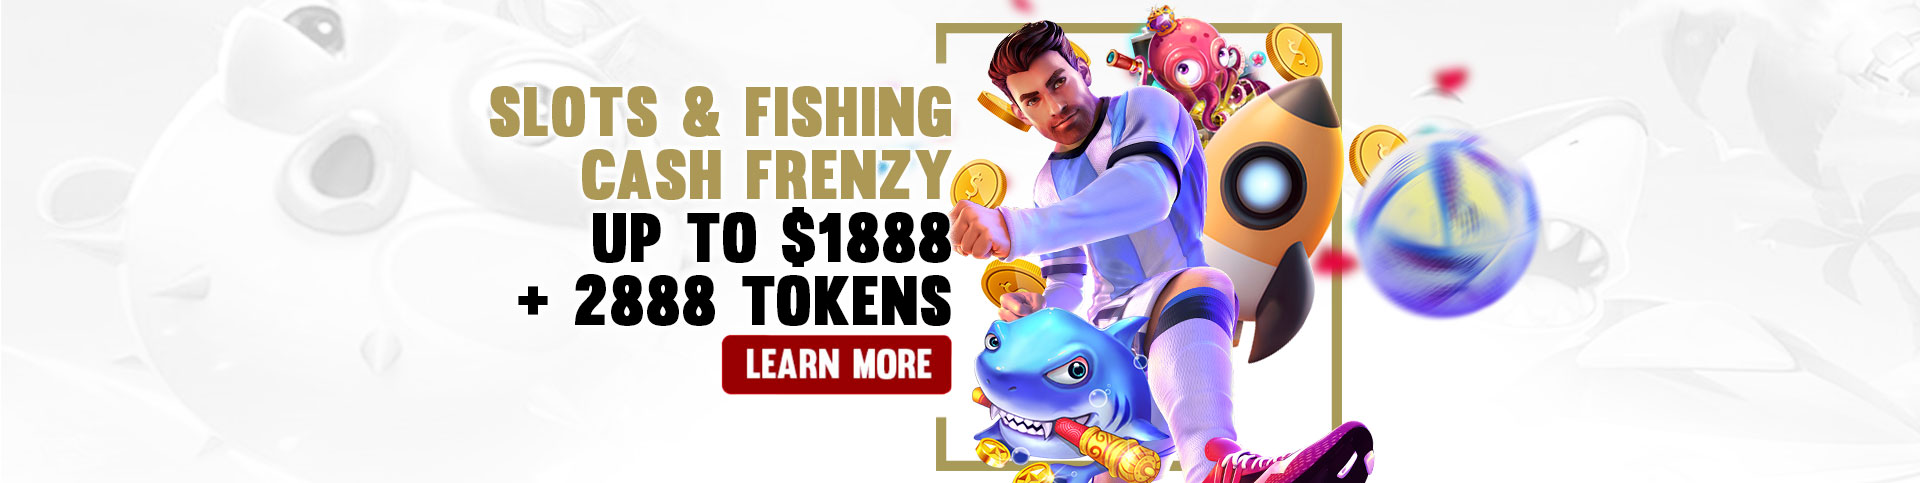 D-Slots-and-Fishing banner